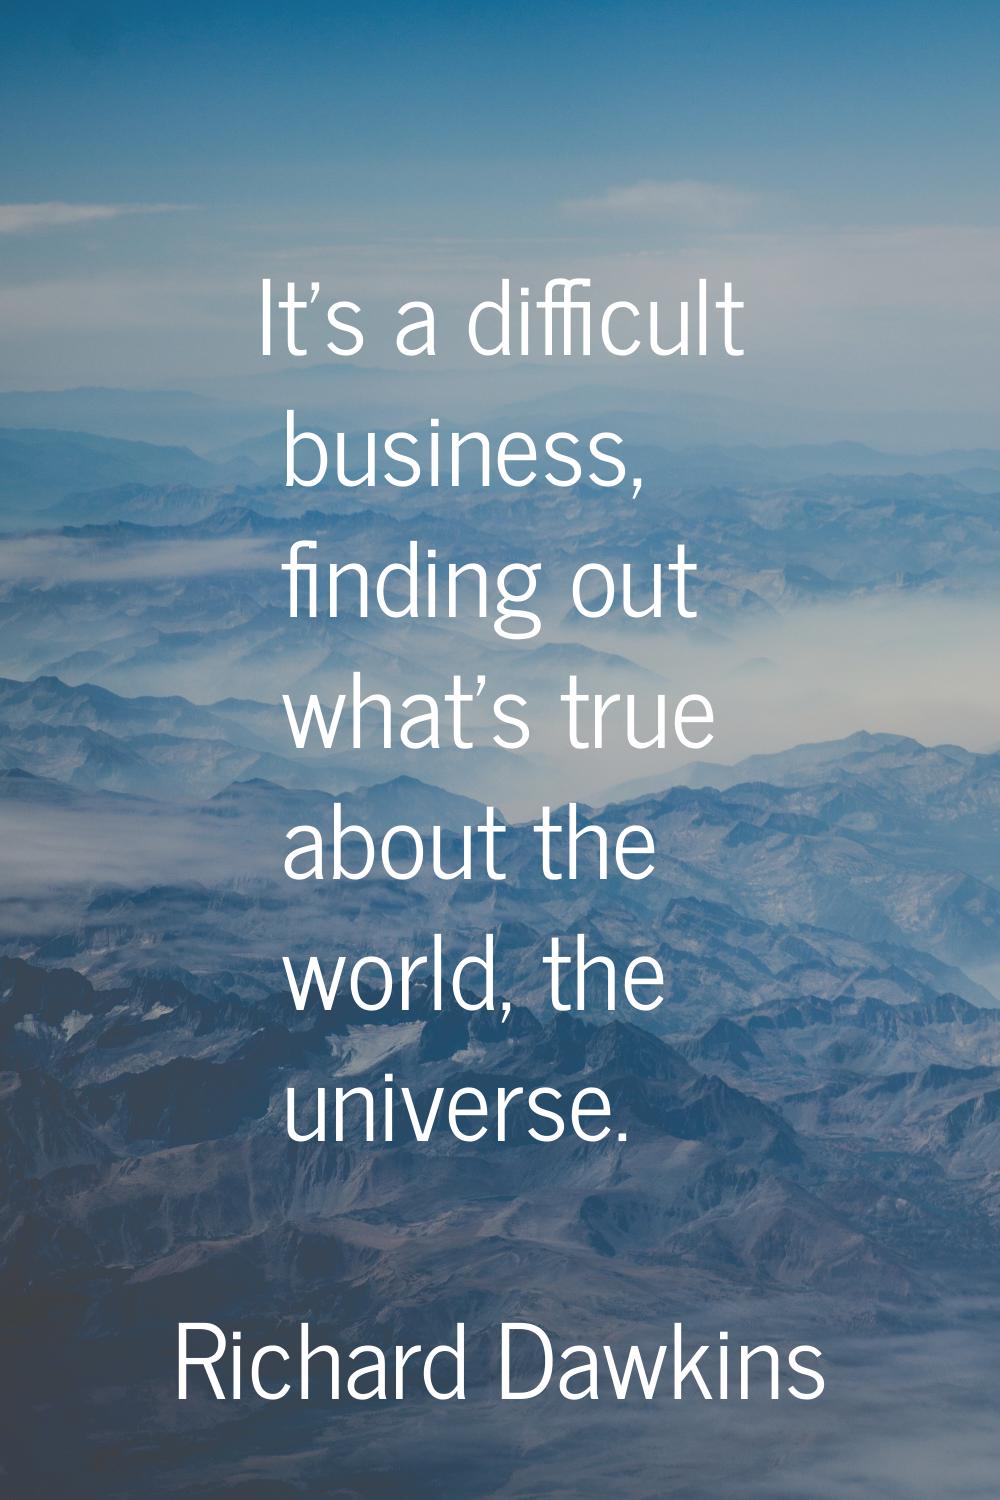 It's a difficult business, finding out what's true about the world, the universe.